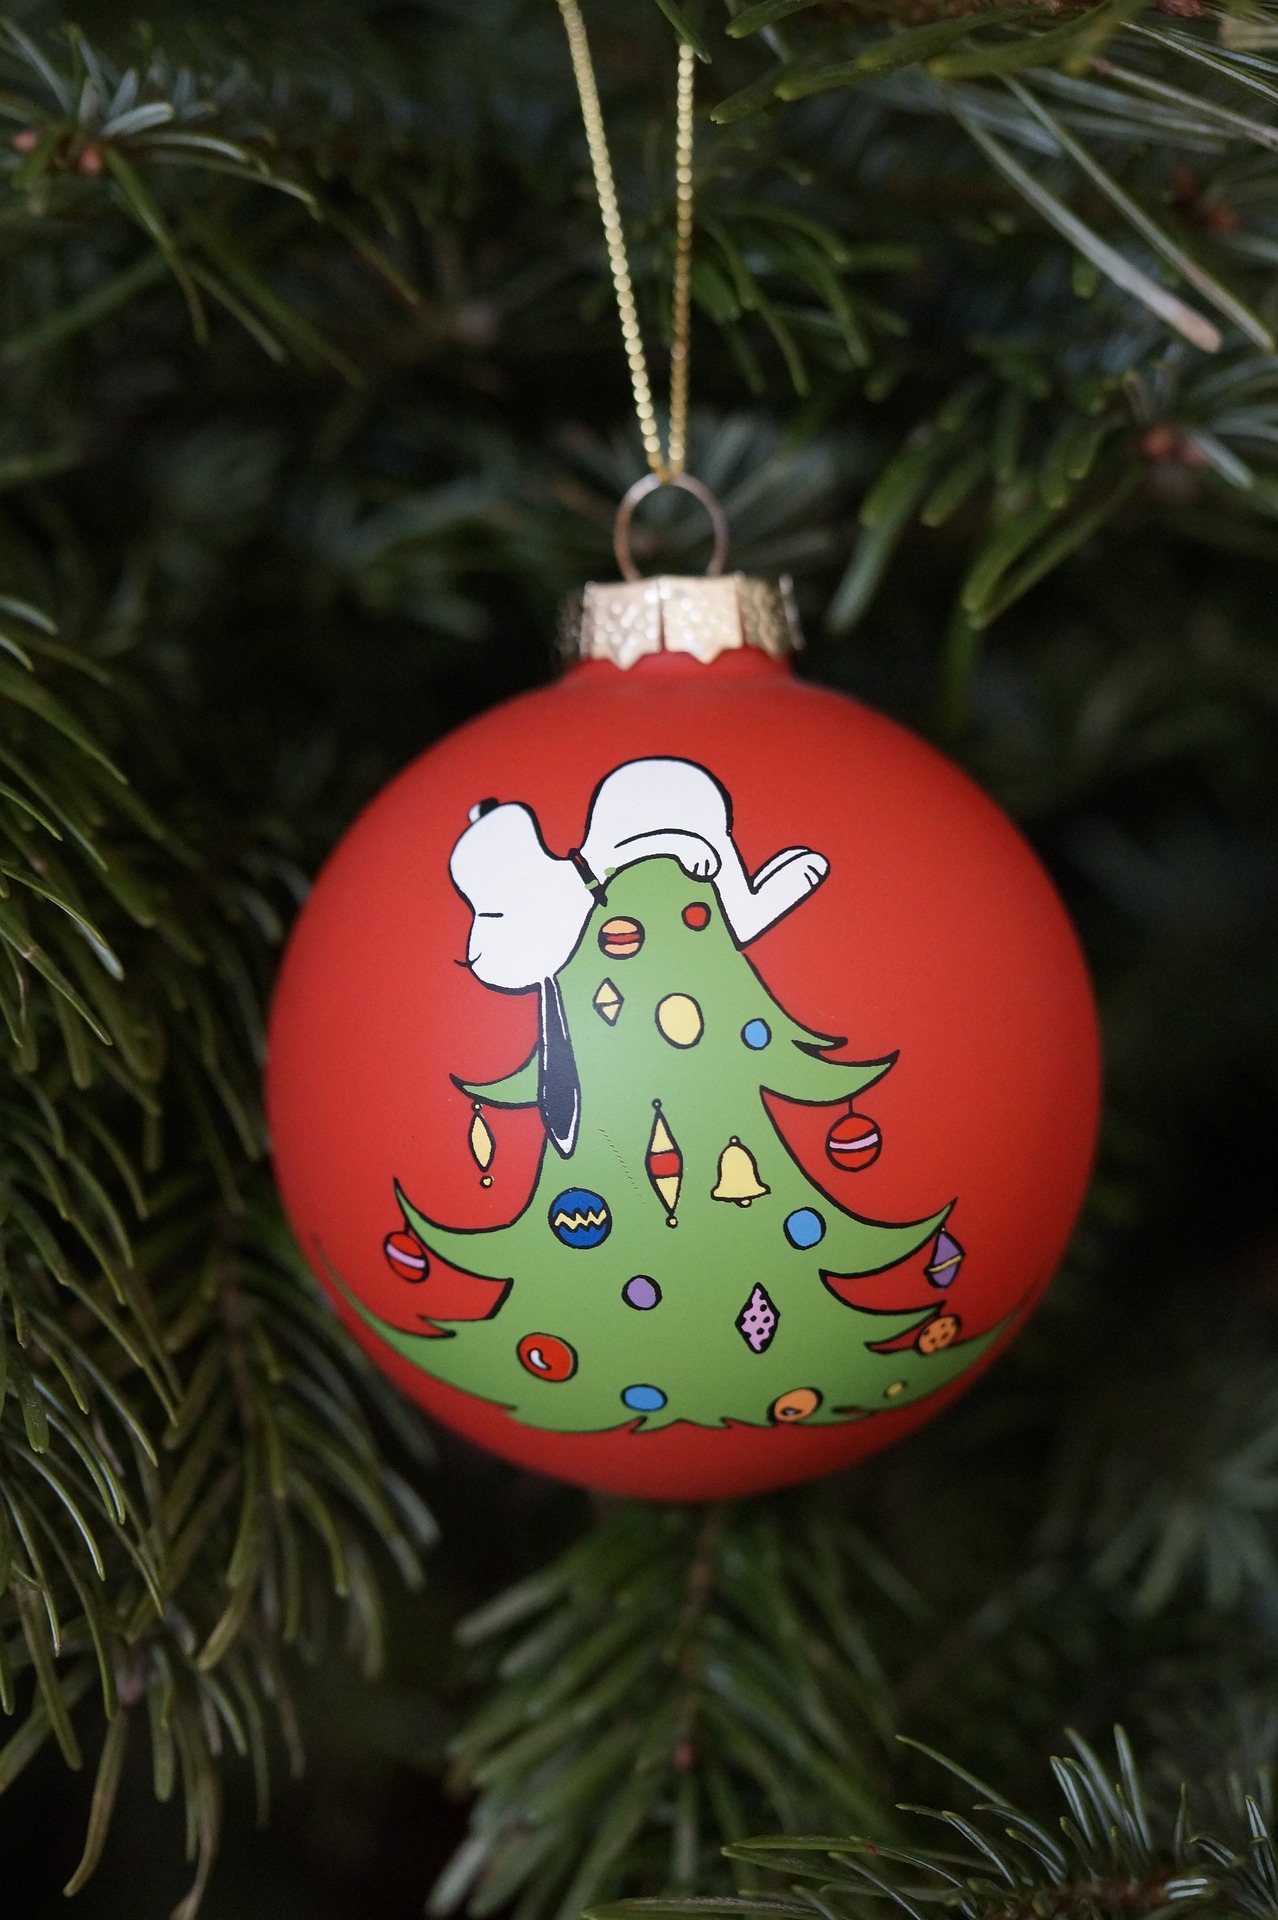 Christmas ornament depicting Snoopy laying on top of a tree